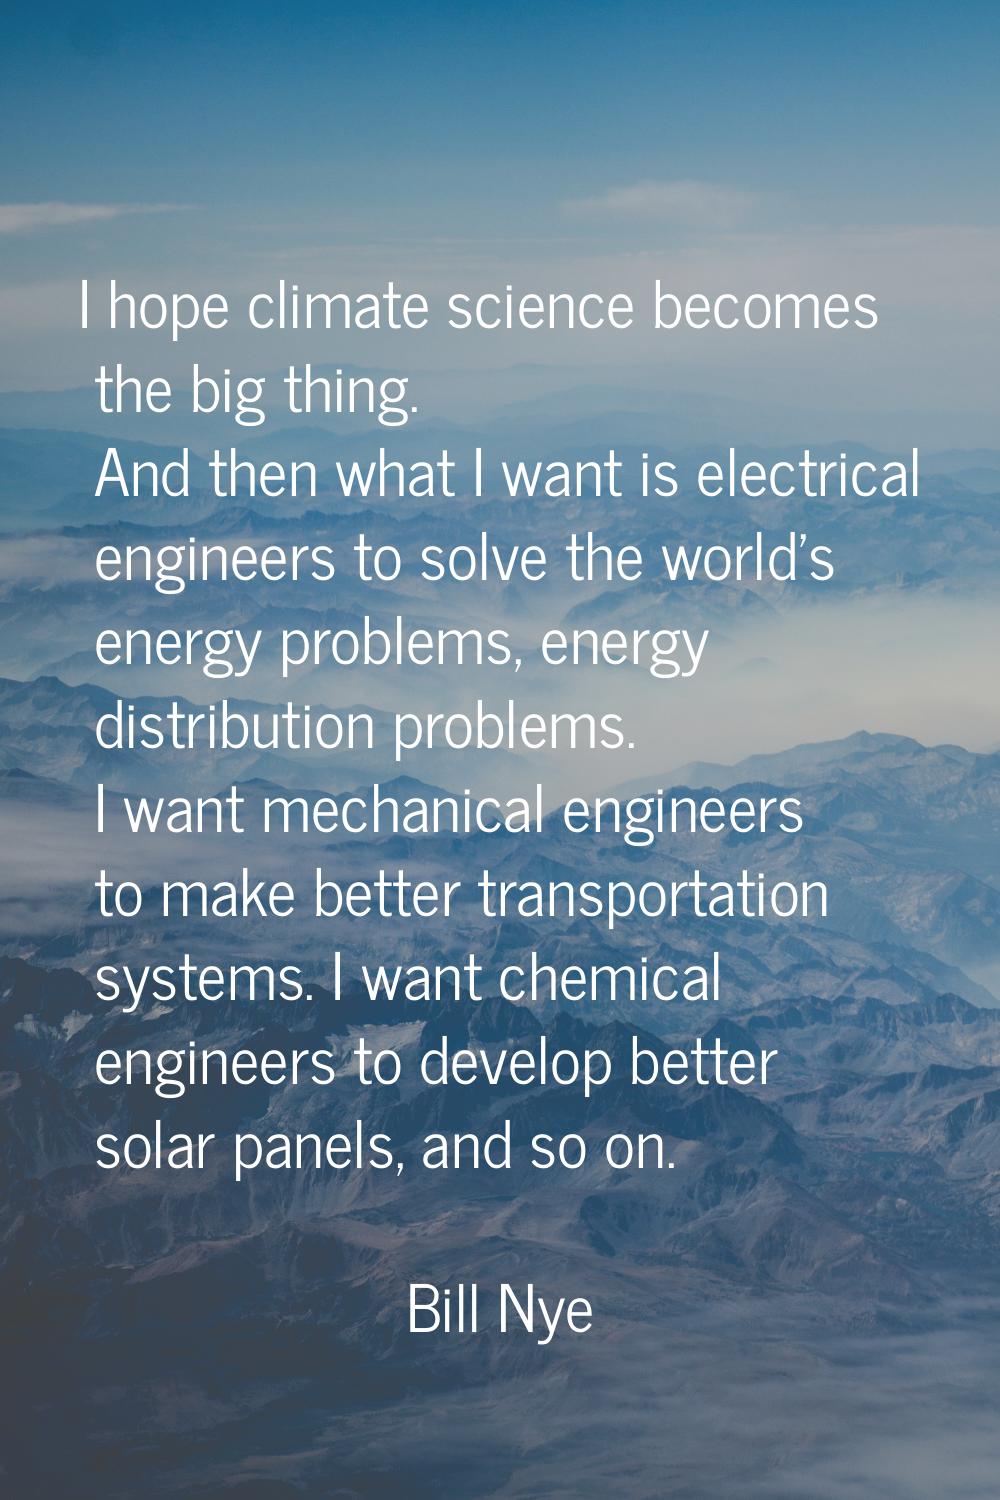 I hope climate science becomes the big thing. And then what I want is electrical engineers to solve